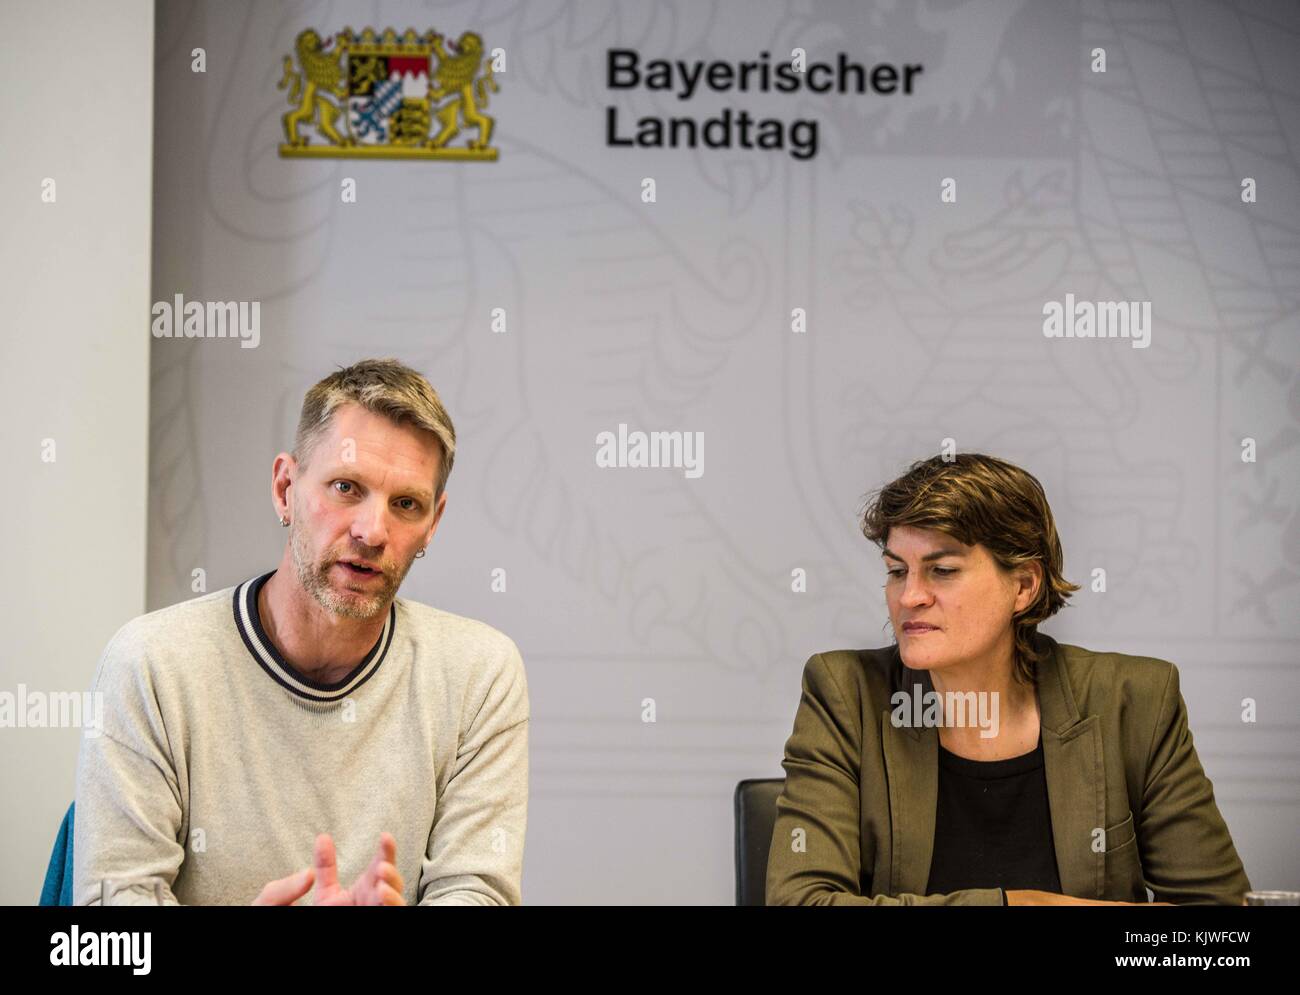 Munich, Bavaria, Germany. 27th Nov, 2017. Claudia Stamm of the Bavarian Parliament held a press conference with JE Schulz of Herzogsaegmuehle and Michael Stenger of the Schlau-Schule regarding the so-called 3 2 rules for refugees that states 3 years of training, 2 years of work experience. Based on more than 14,000 job vacancies, Stamm and the panel regards refugee training as profitable for German society as well as for the refugees. However, numerous hurdles are in place virtually guaranteeing that the refugees will not be able to integrate into society. Cases were cited where highl Stock Photo